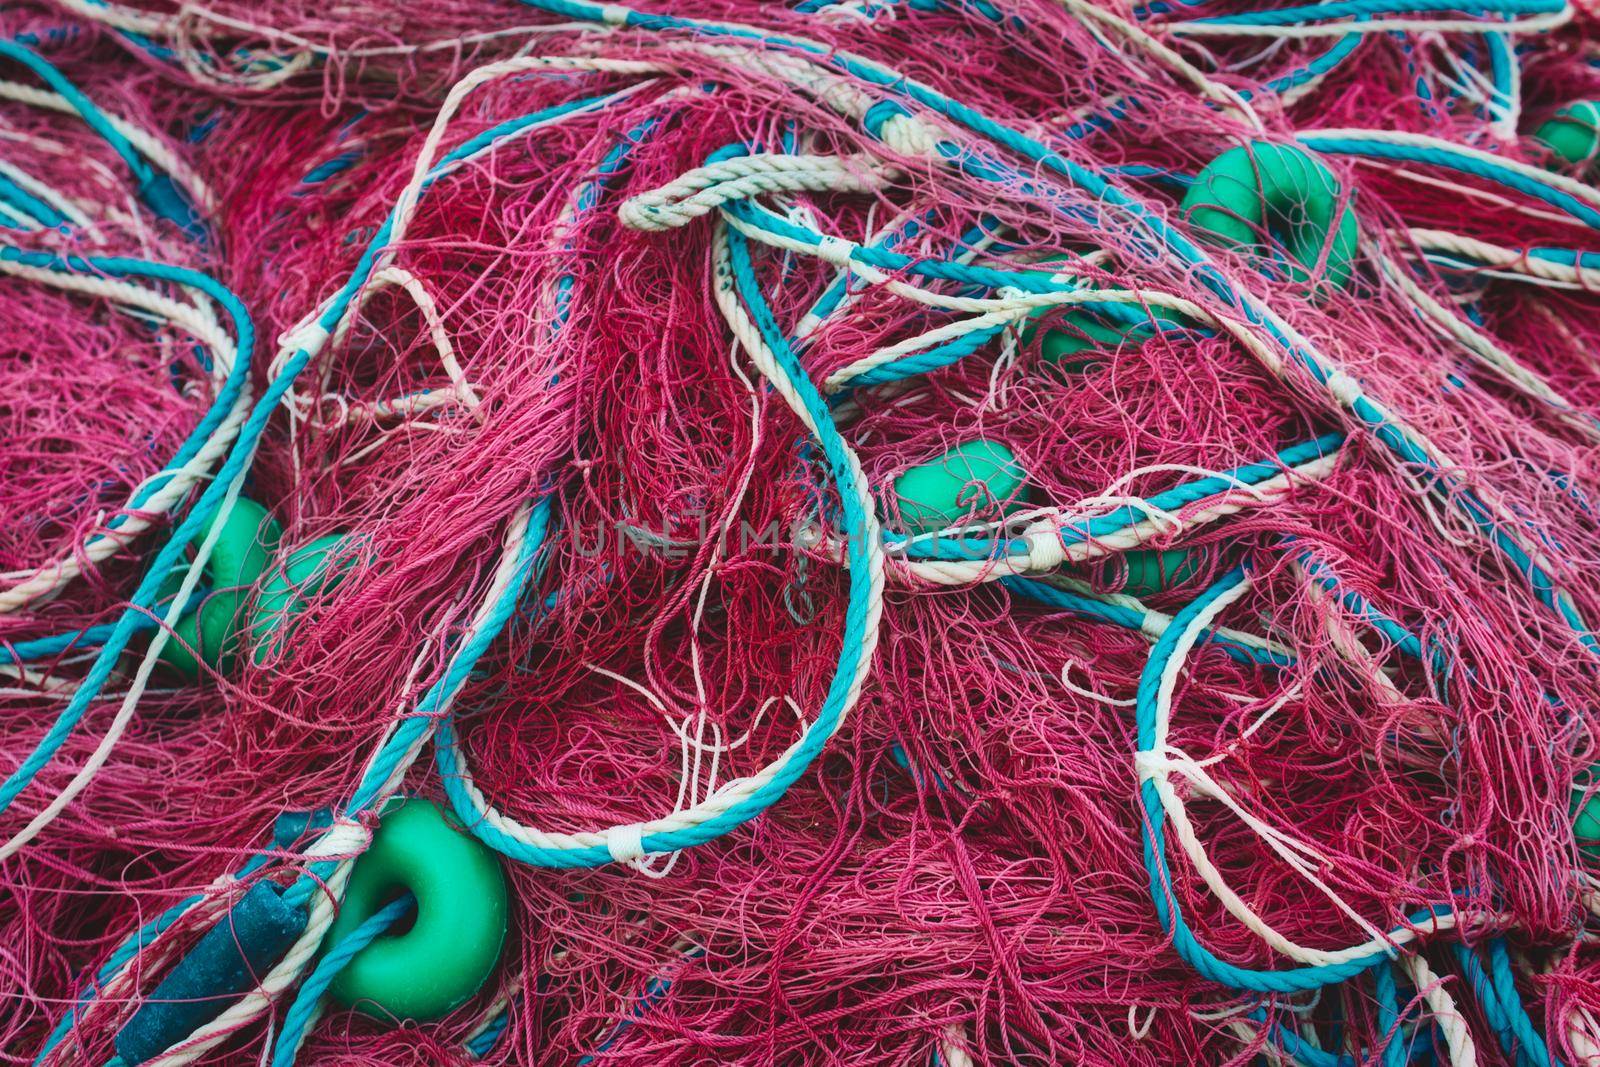 Full-frame background texture of fishermen's nets tangled by tennesseewitney